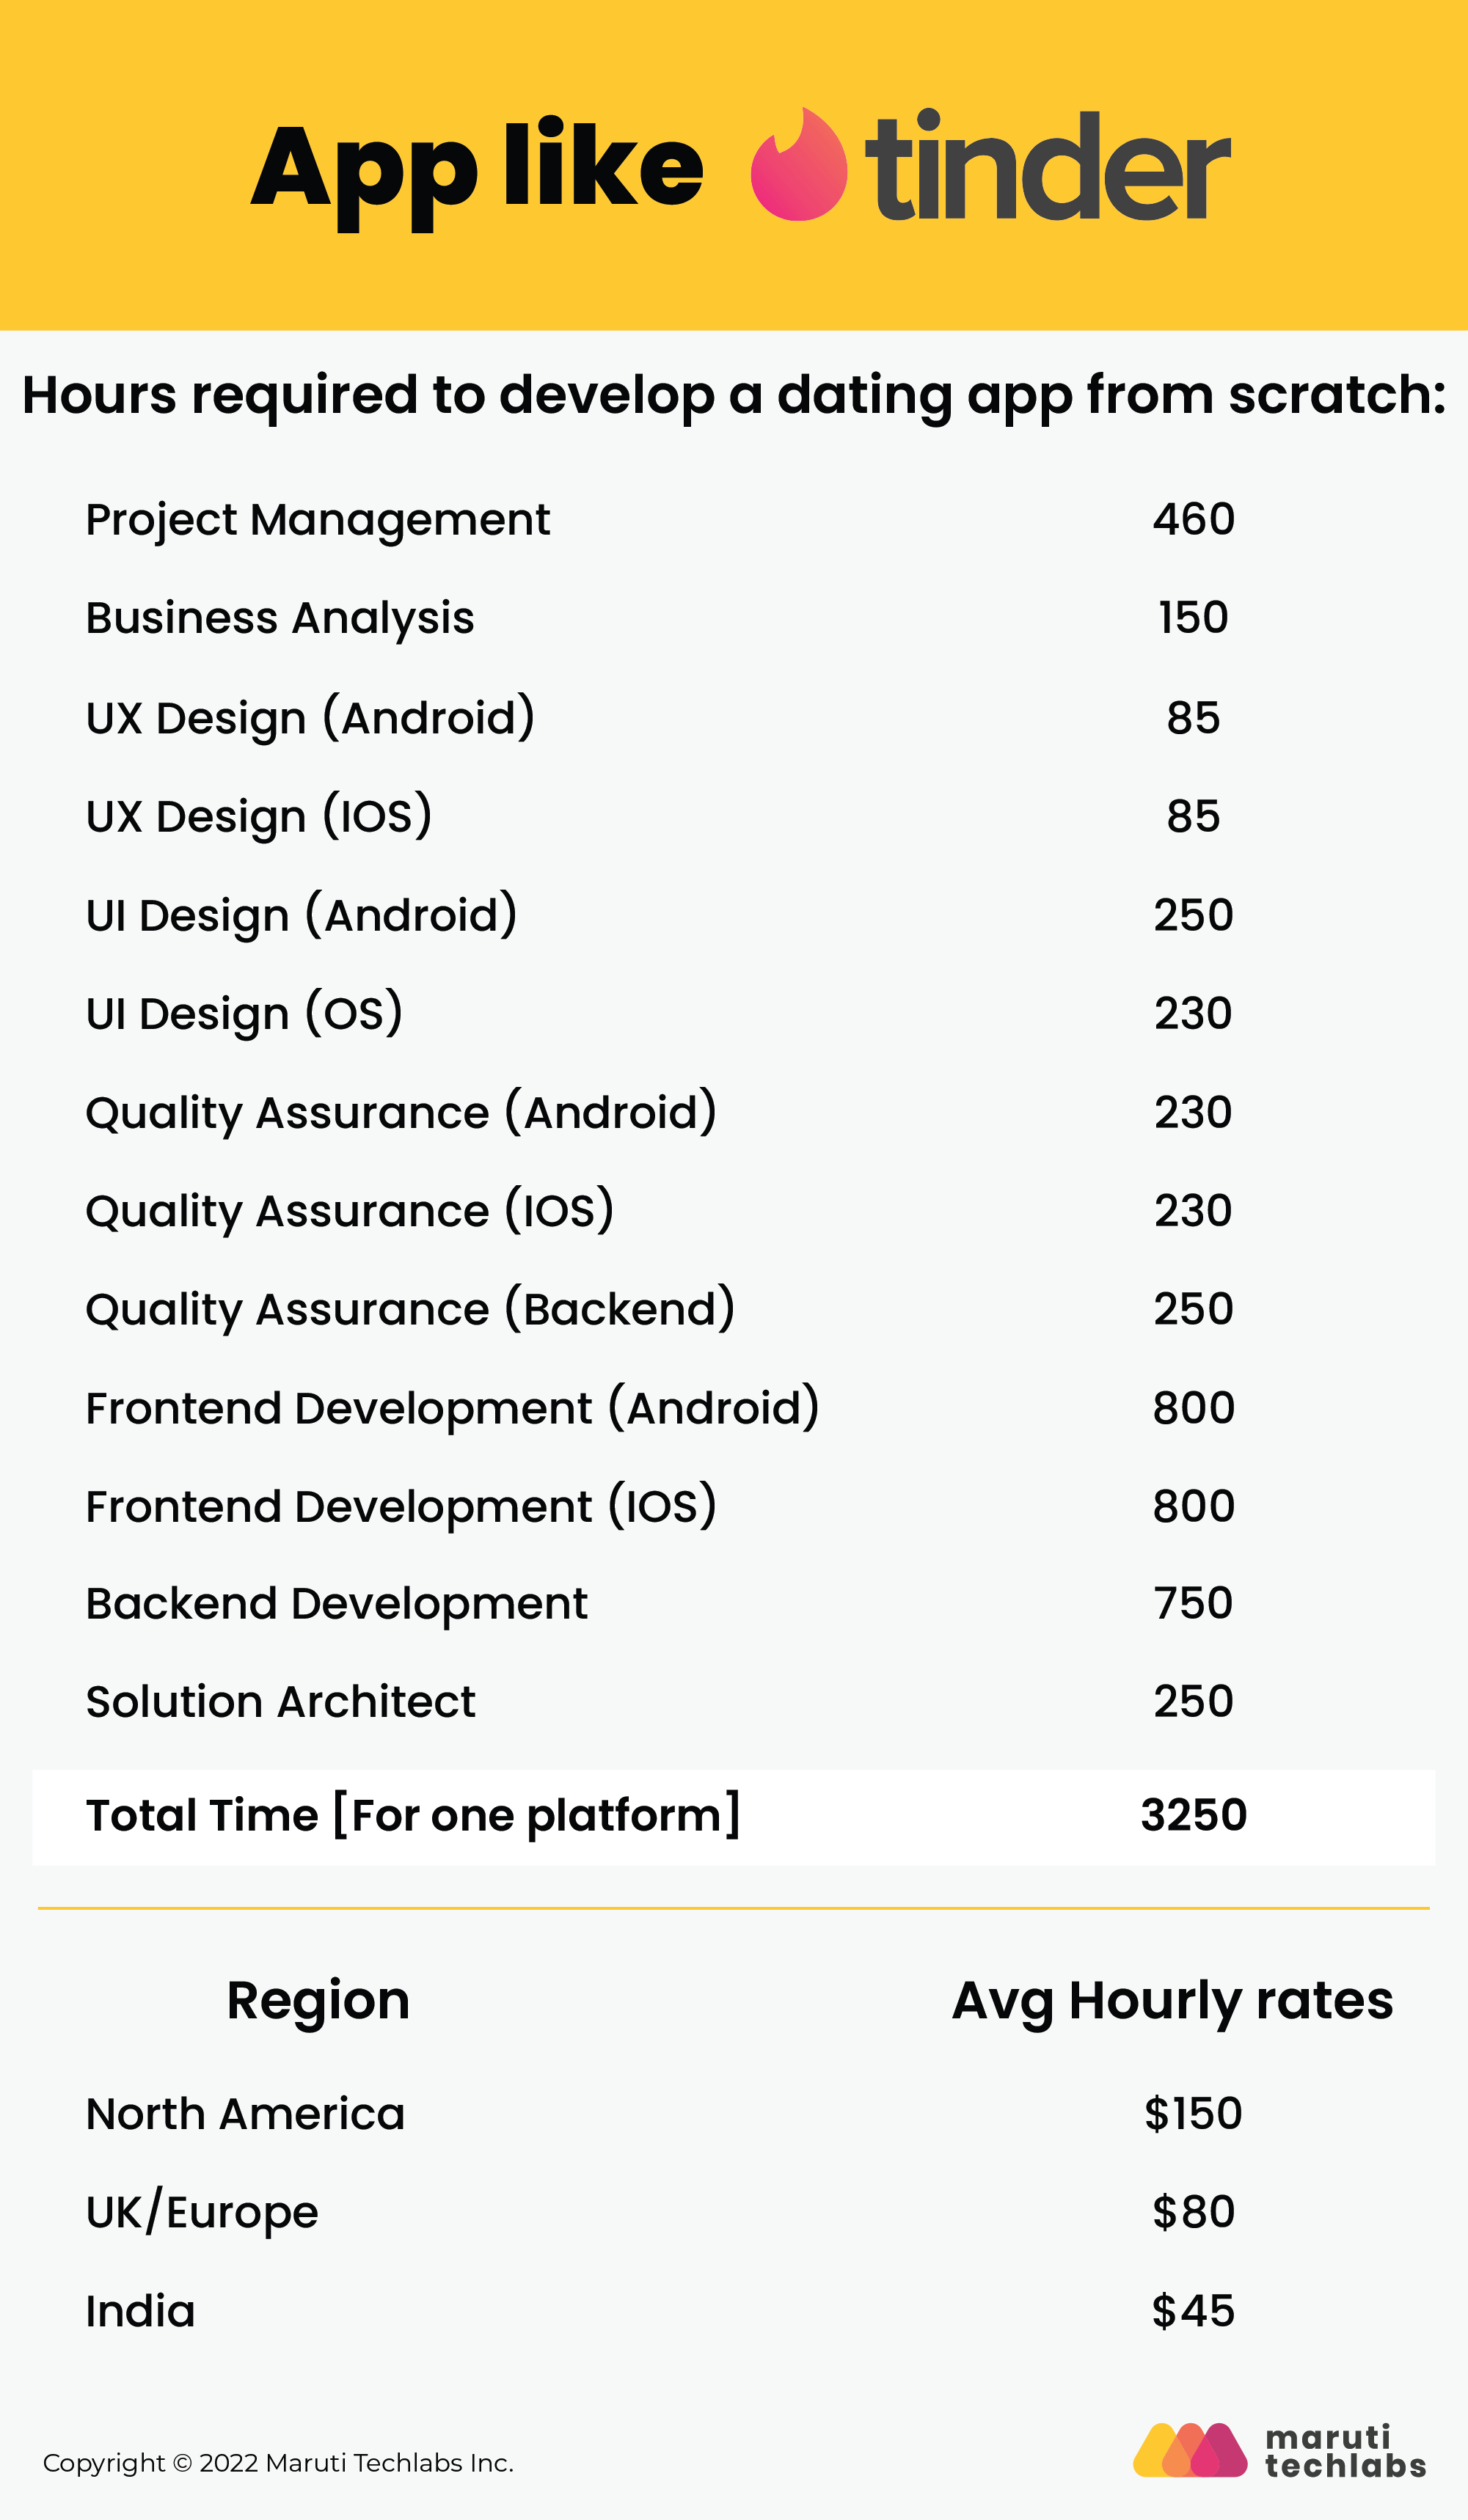 Hours required to develop a dating app from scratch